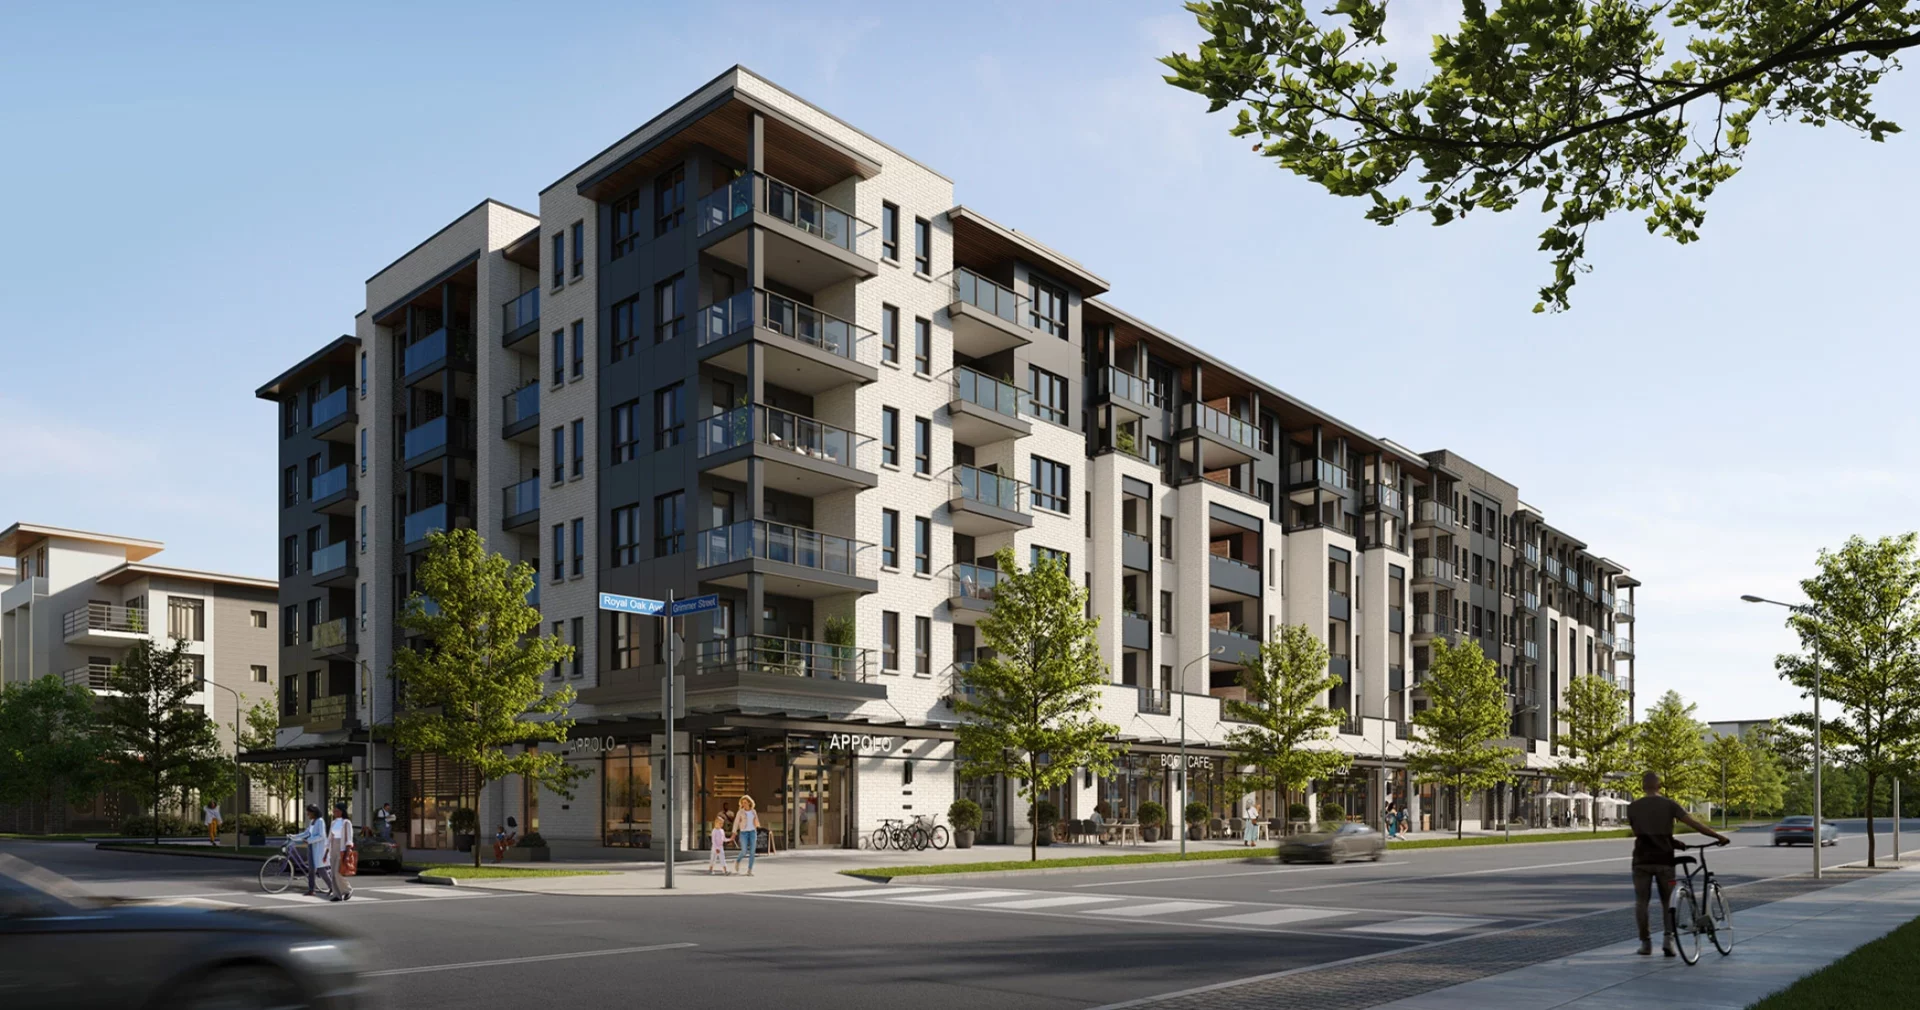 Nido by Wanson Group is a mixed-use, mixed-tenure Metrotown mid-rise.